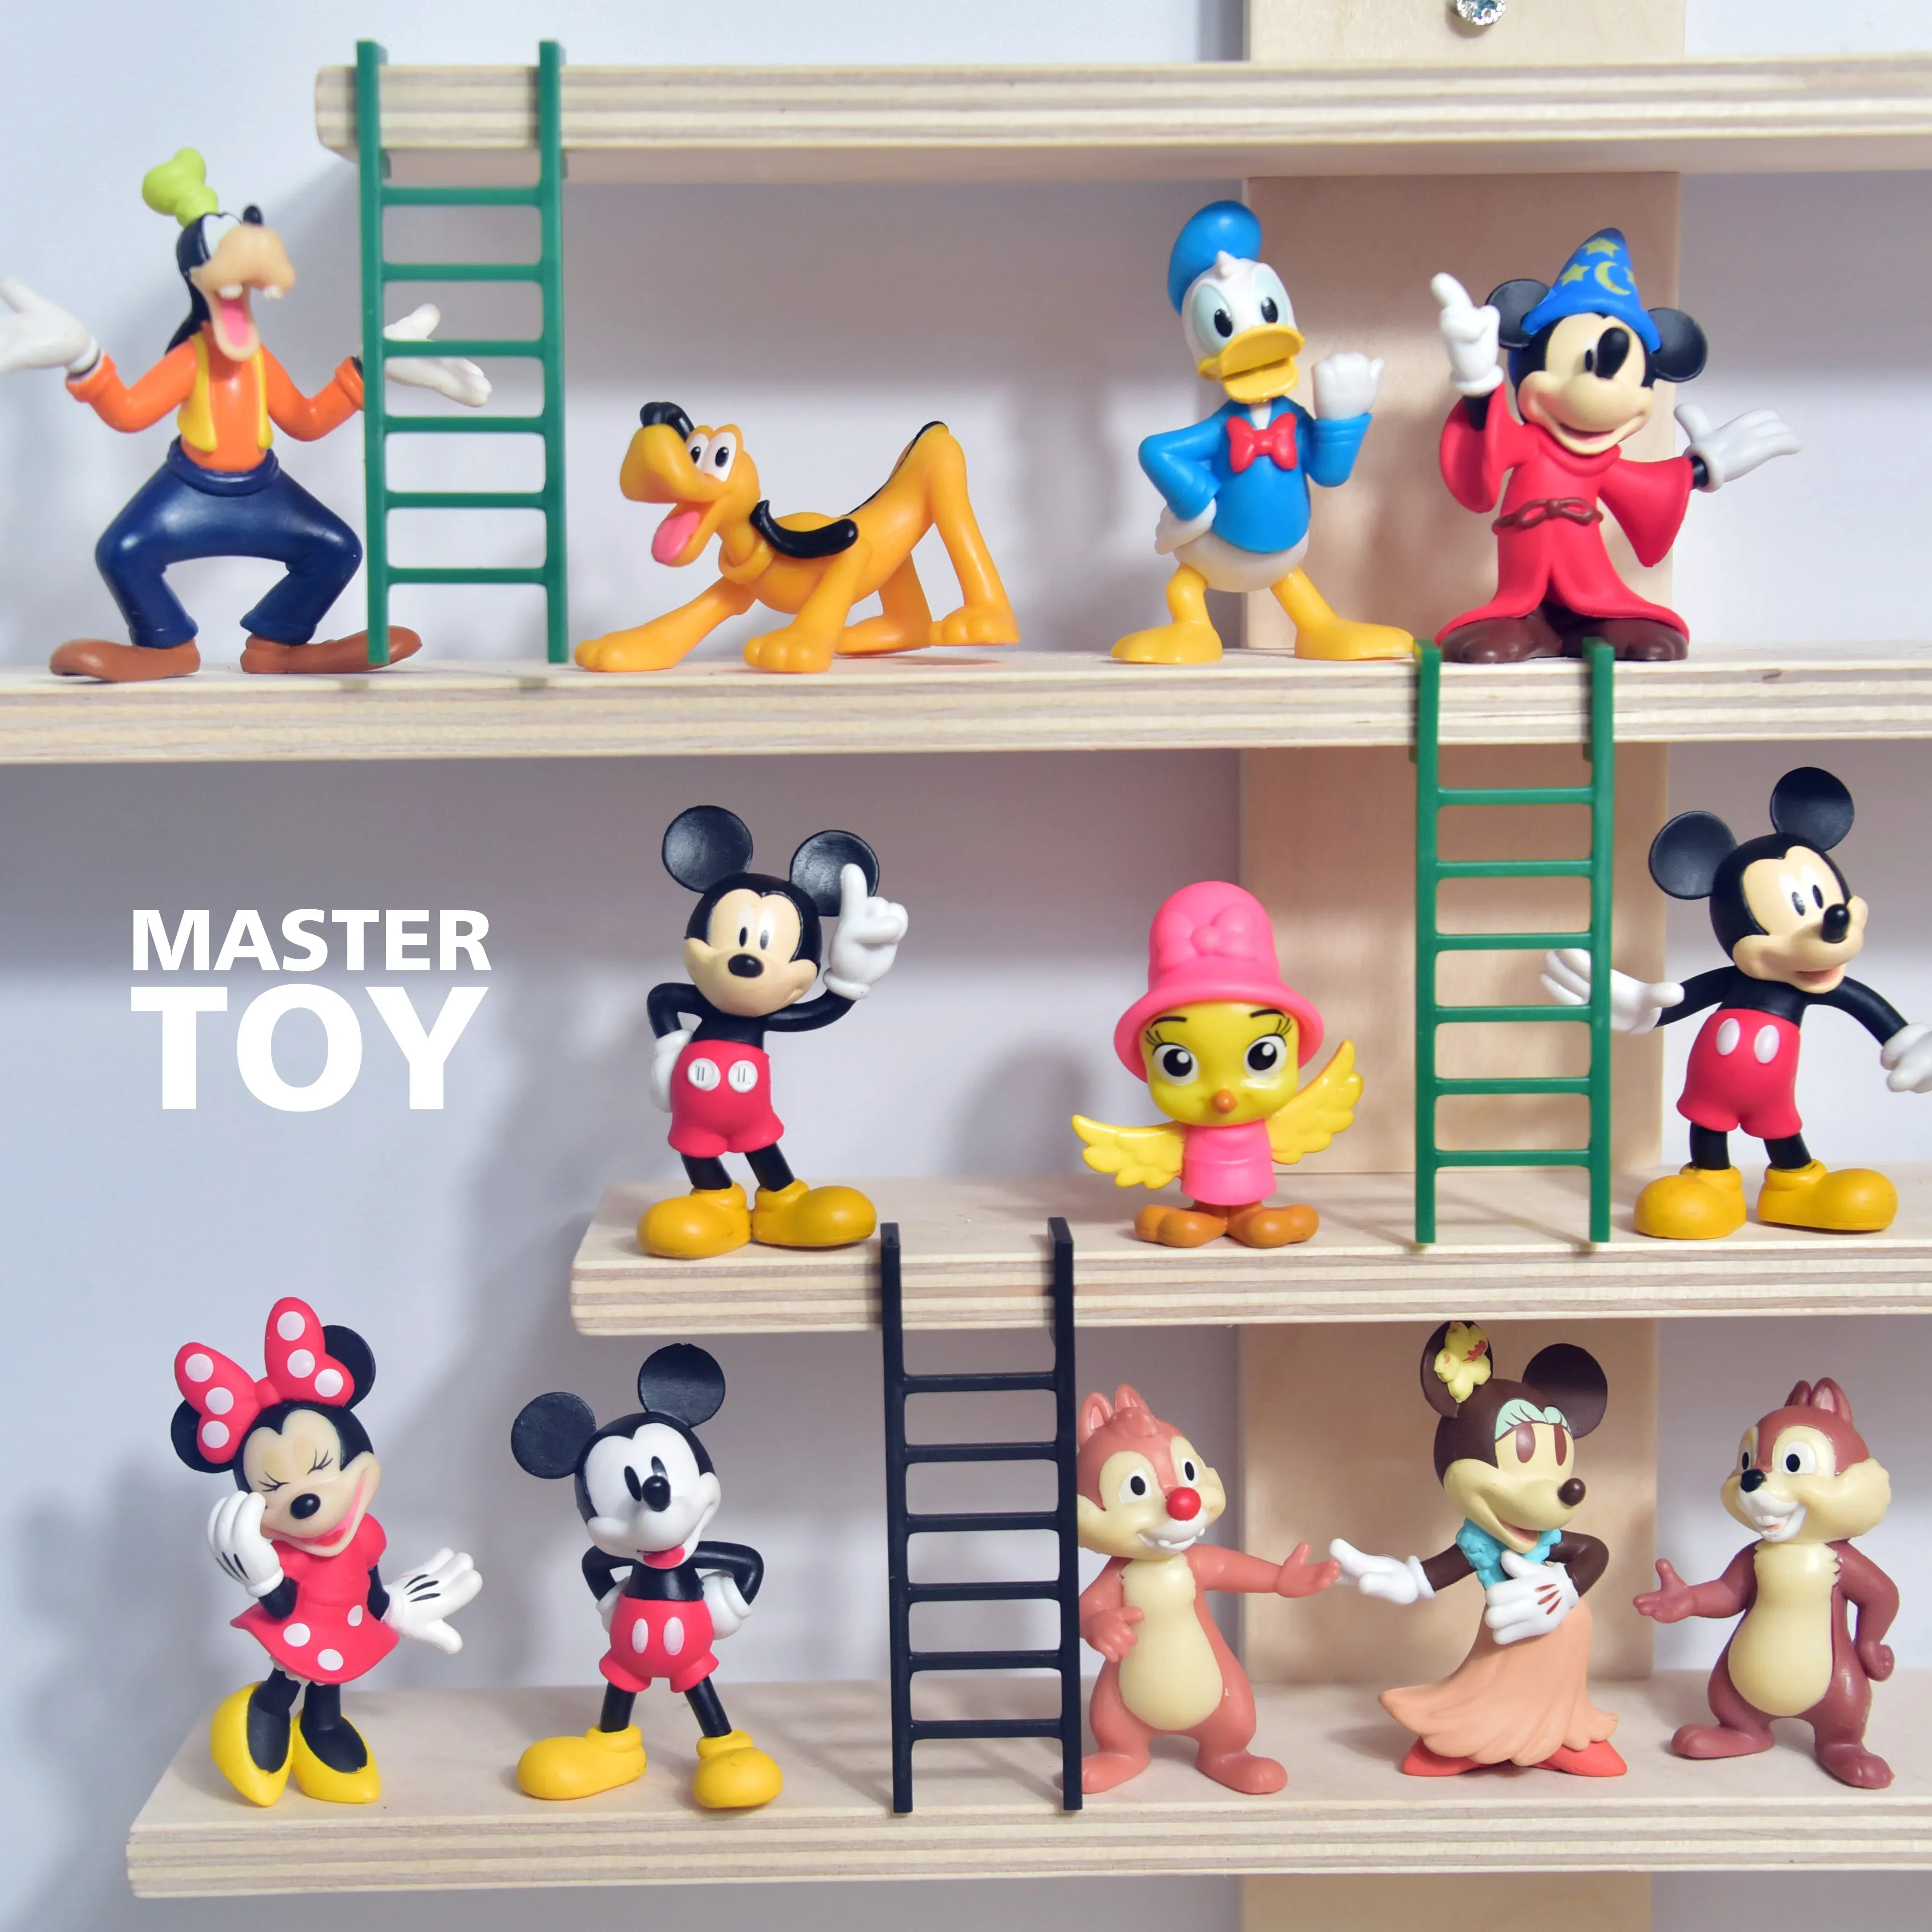 

Disney Mickey Mouse Minnie Goofy Plut Donald Duck Daisy Doll Gifts Toy Model Anime Figures Collect Ornaments